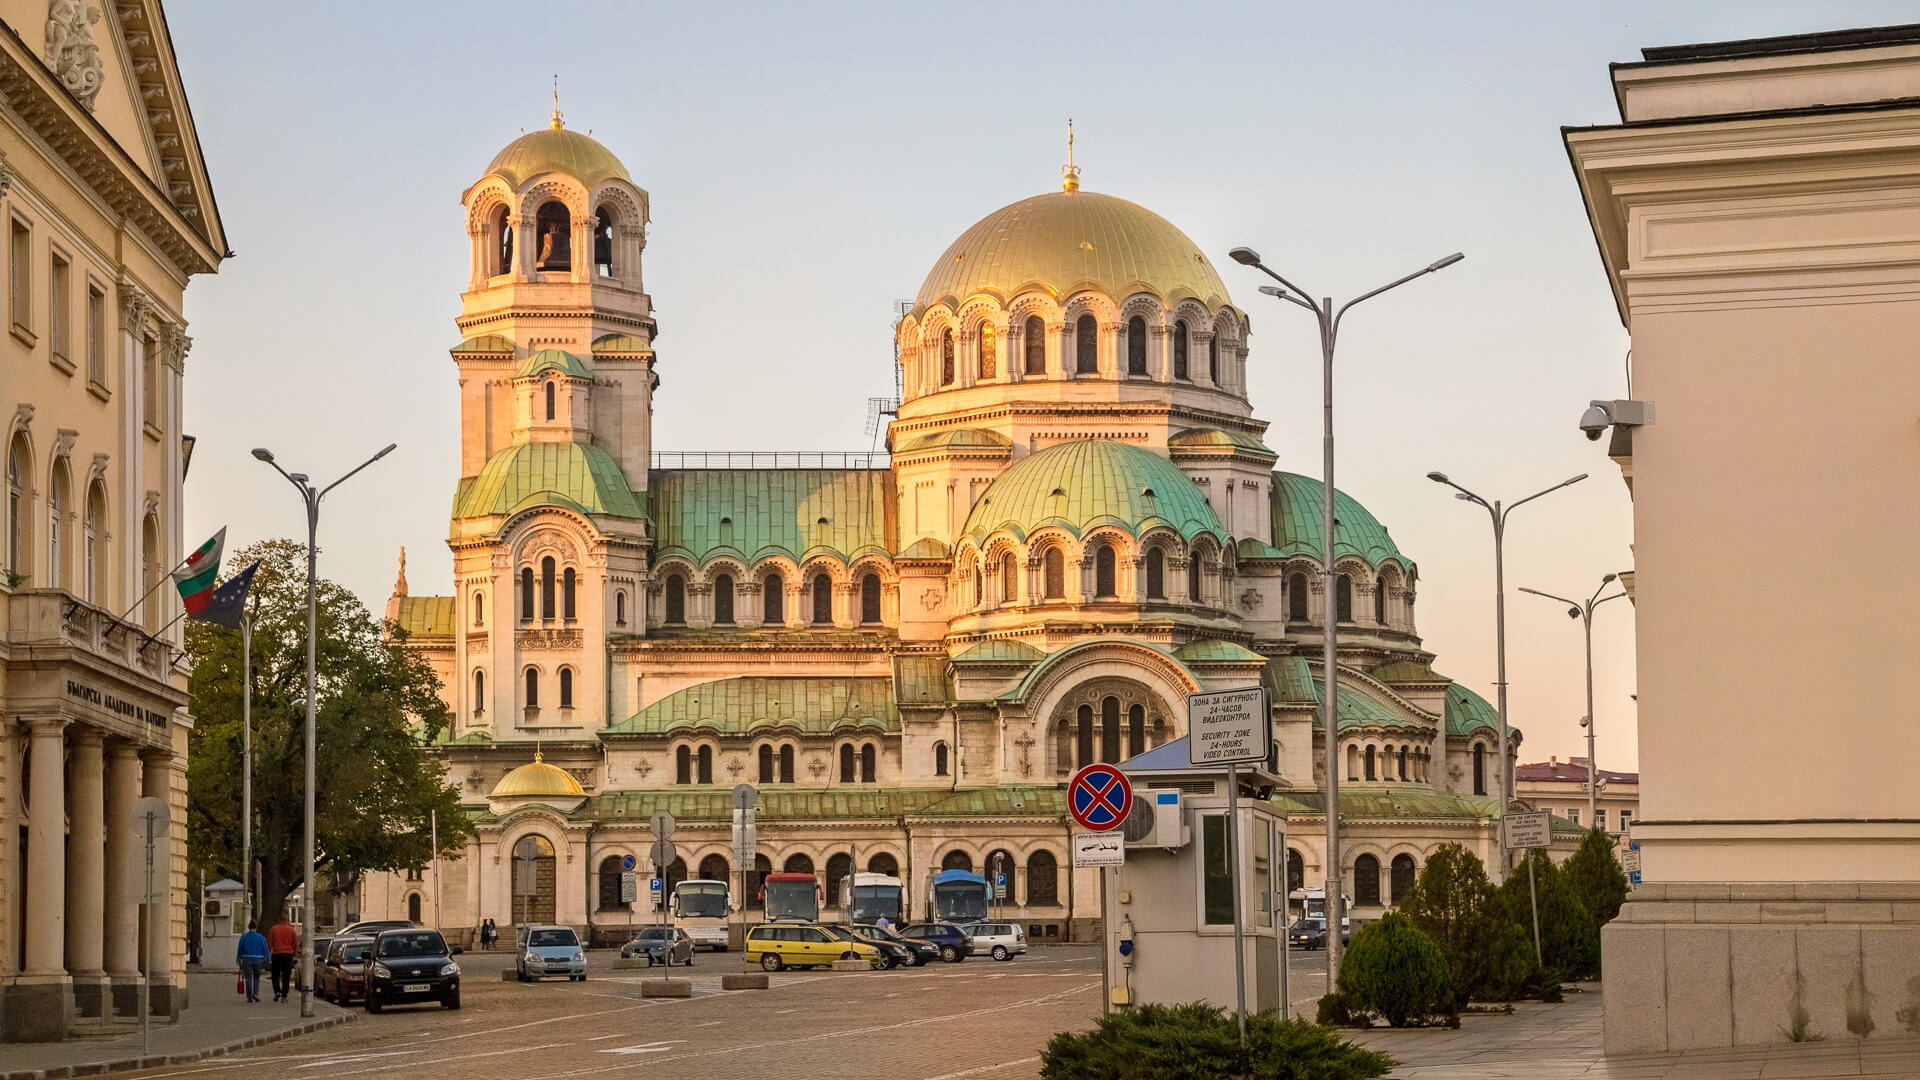 <ul> <li><strong>Price for a family of four for one week</strong>: $1,100 (not including flights) </li> </ul> <p>"The capital of Sofia is where you'll likely fly to when visiting this country, however, there are a lot of other great regions I recommend exploring," said Cora Harrison, who runs <a href="https://insideoursuitcase.com/" rel="noreferrer noopener">Inside Our Suitcase</a>. "Plovdiv is the second largest city in Bulgaria and was the 2019 European Capital of Culture and is considered to be the oldest continuously inhabited city in Europe (and one of the oldest in the world) dating back more than 8,000 years. Meanwhile, if you're looking for sun, sea and sand during your trip consider heading out to the coastal region of Nessebar just south of the popular party region of Sunny Beach."</p>